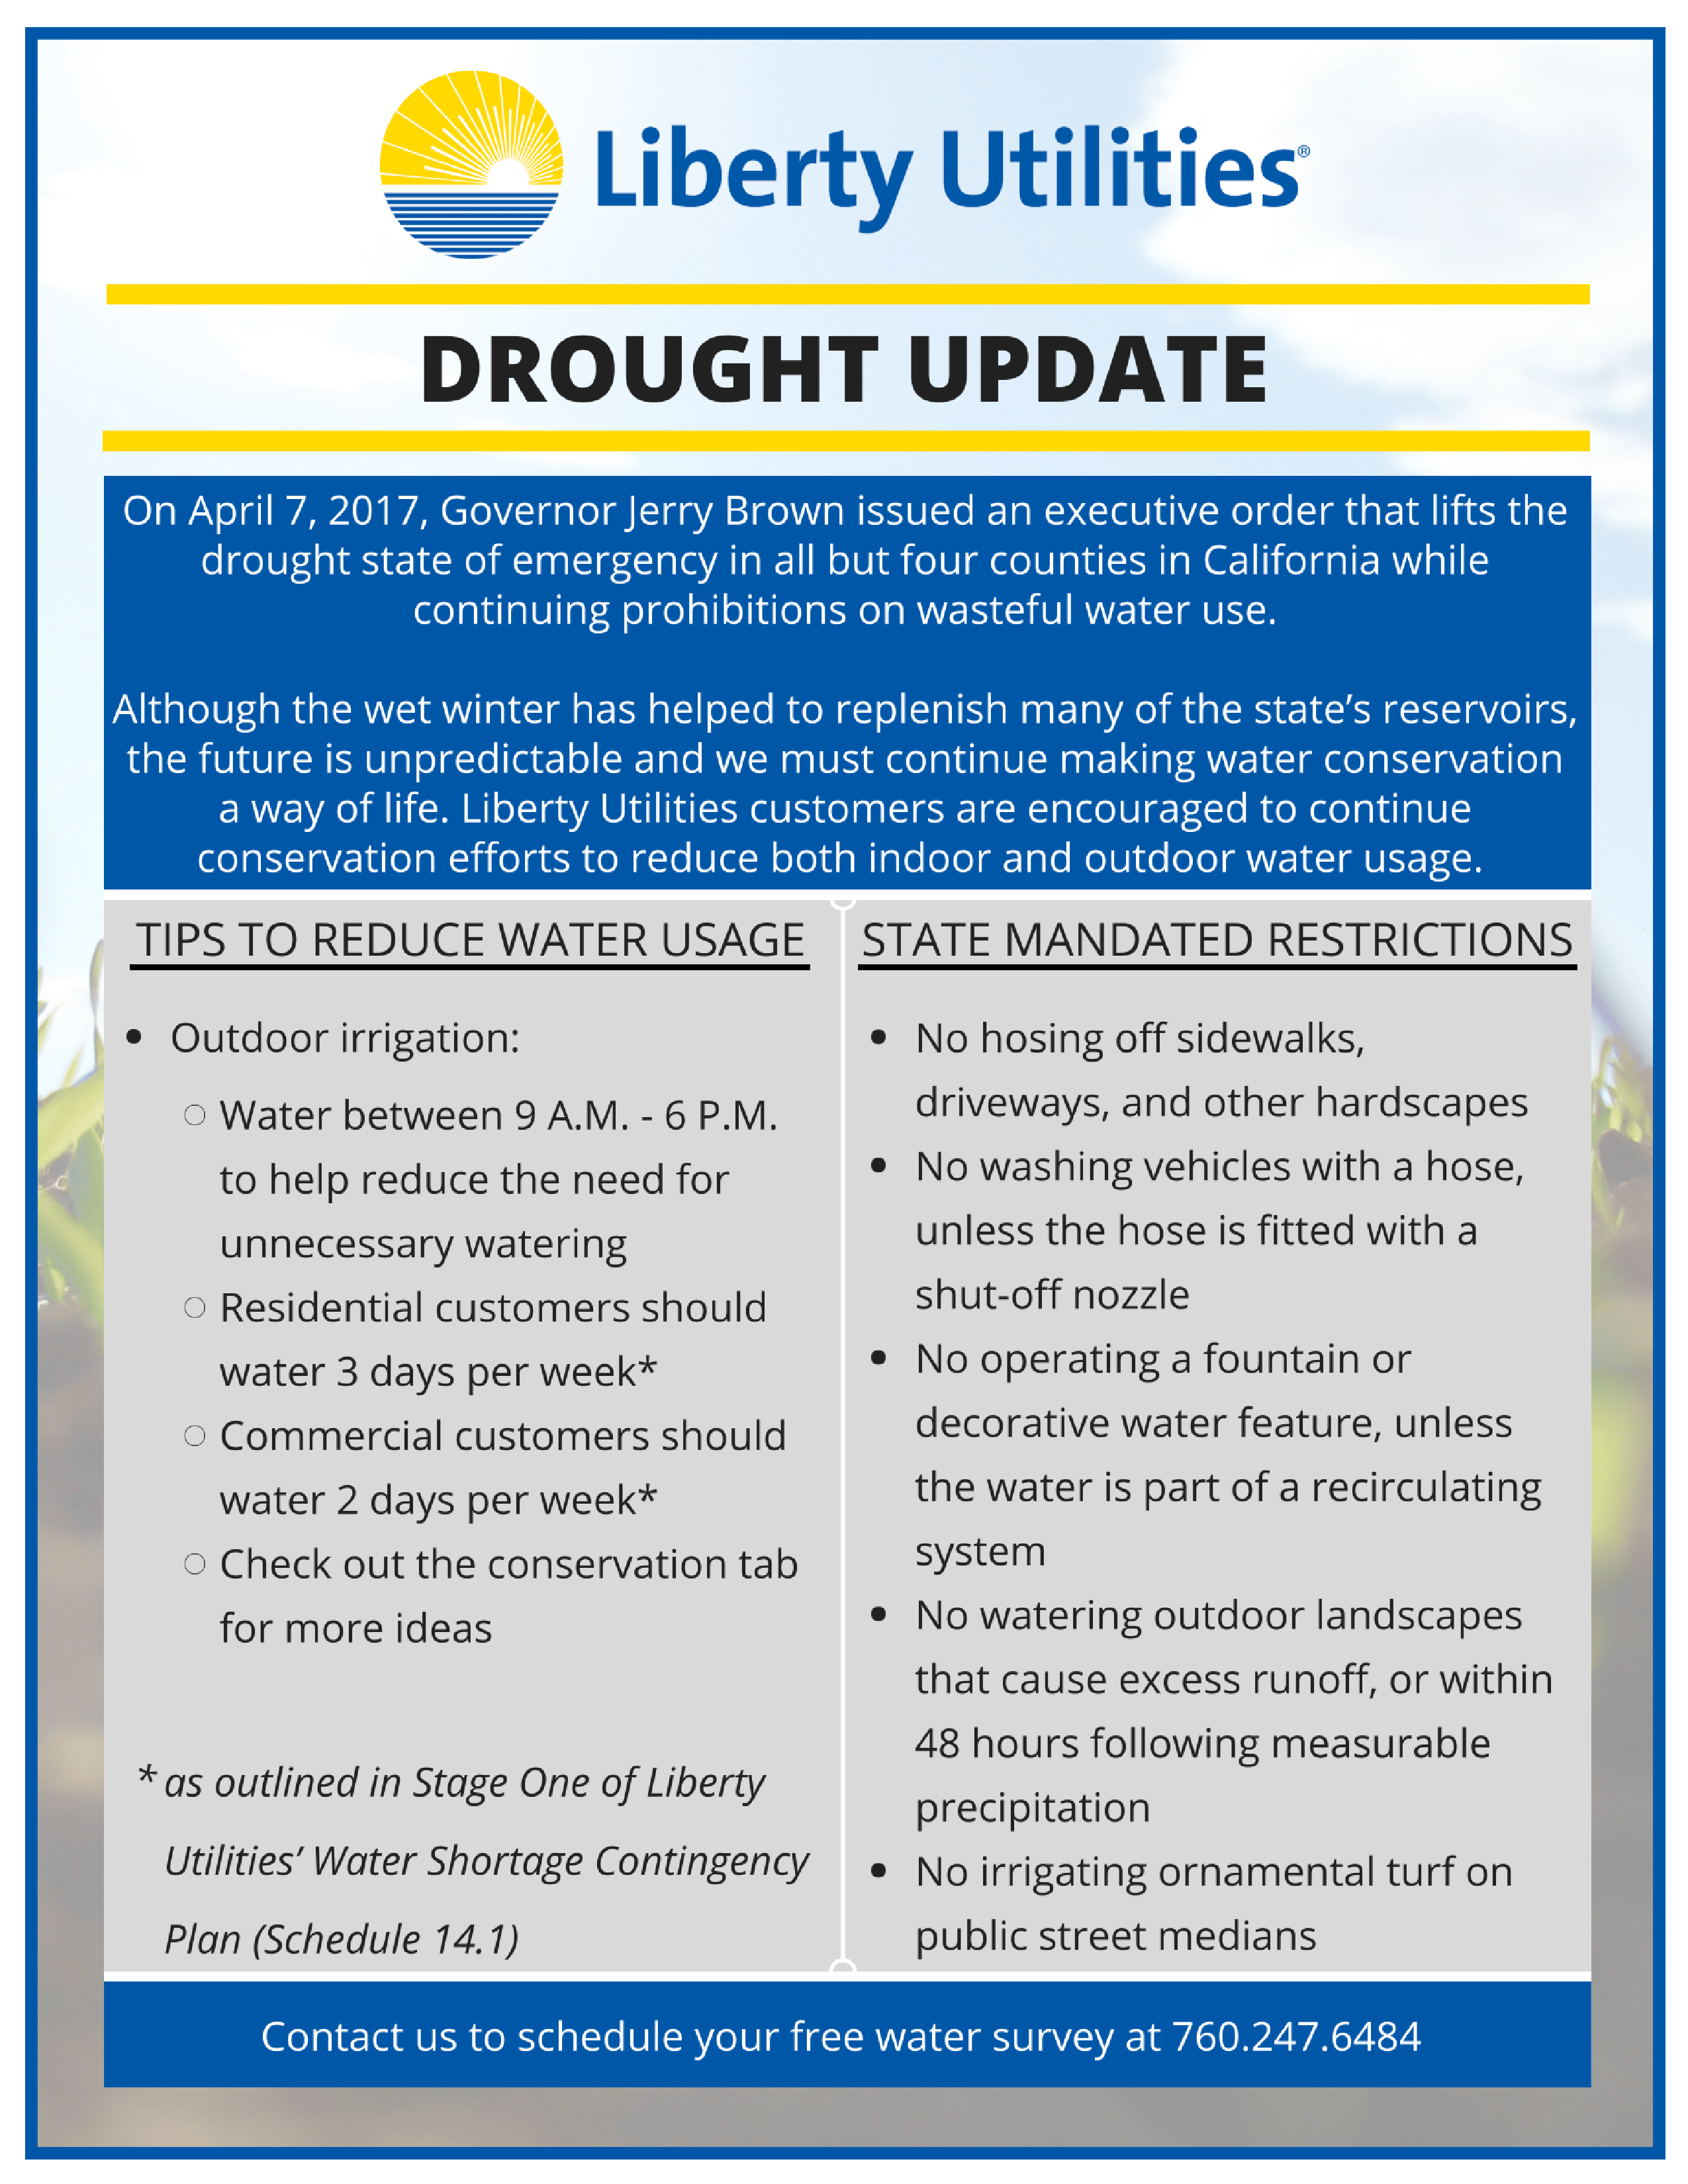 20170407-LAV-drought-guidelines